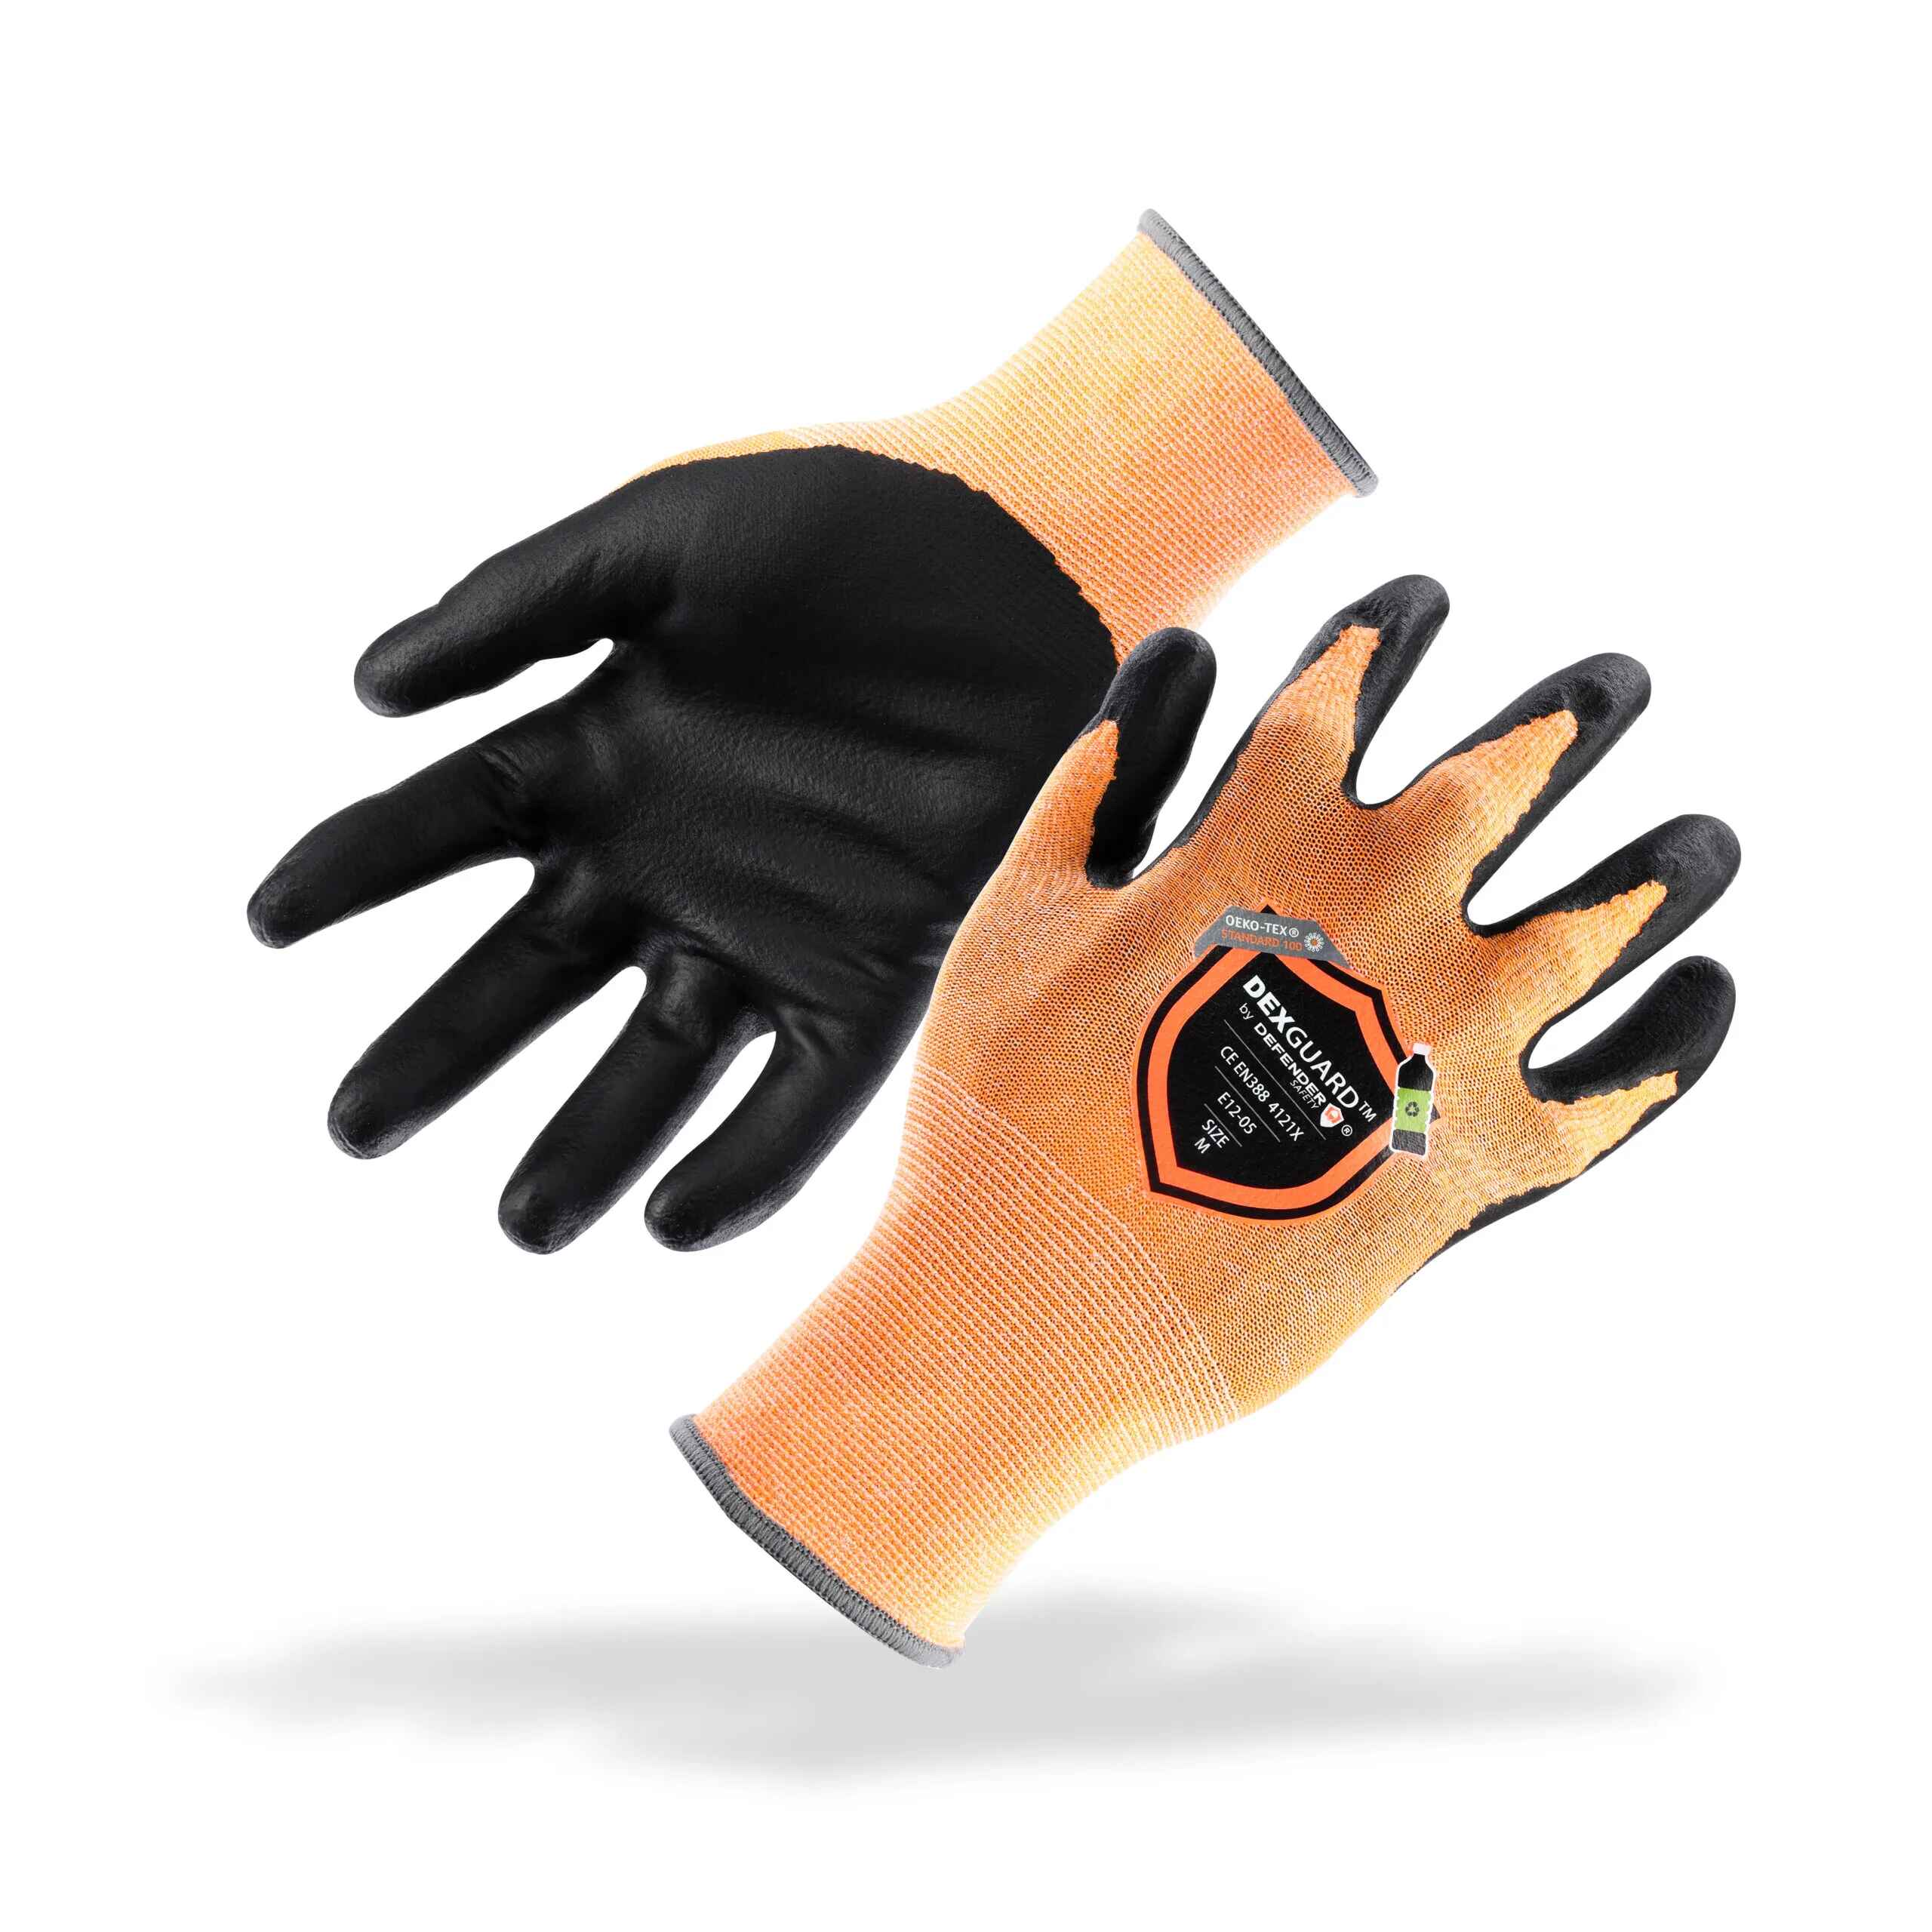 https://defendersafety.com/cdn/shop/products/dexguard-general-purpose-recycled-gloves-touch-screen-compatible-abrasion-resistant-level-4-foam-nitrile-coating-139196.jpg?v=1690825175&width=2560